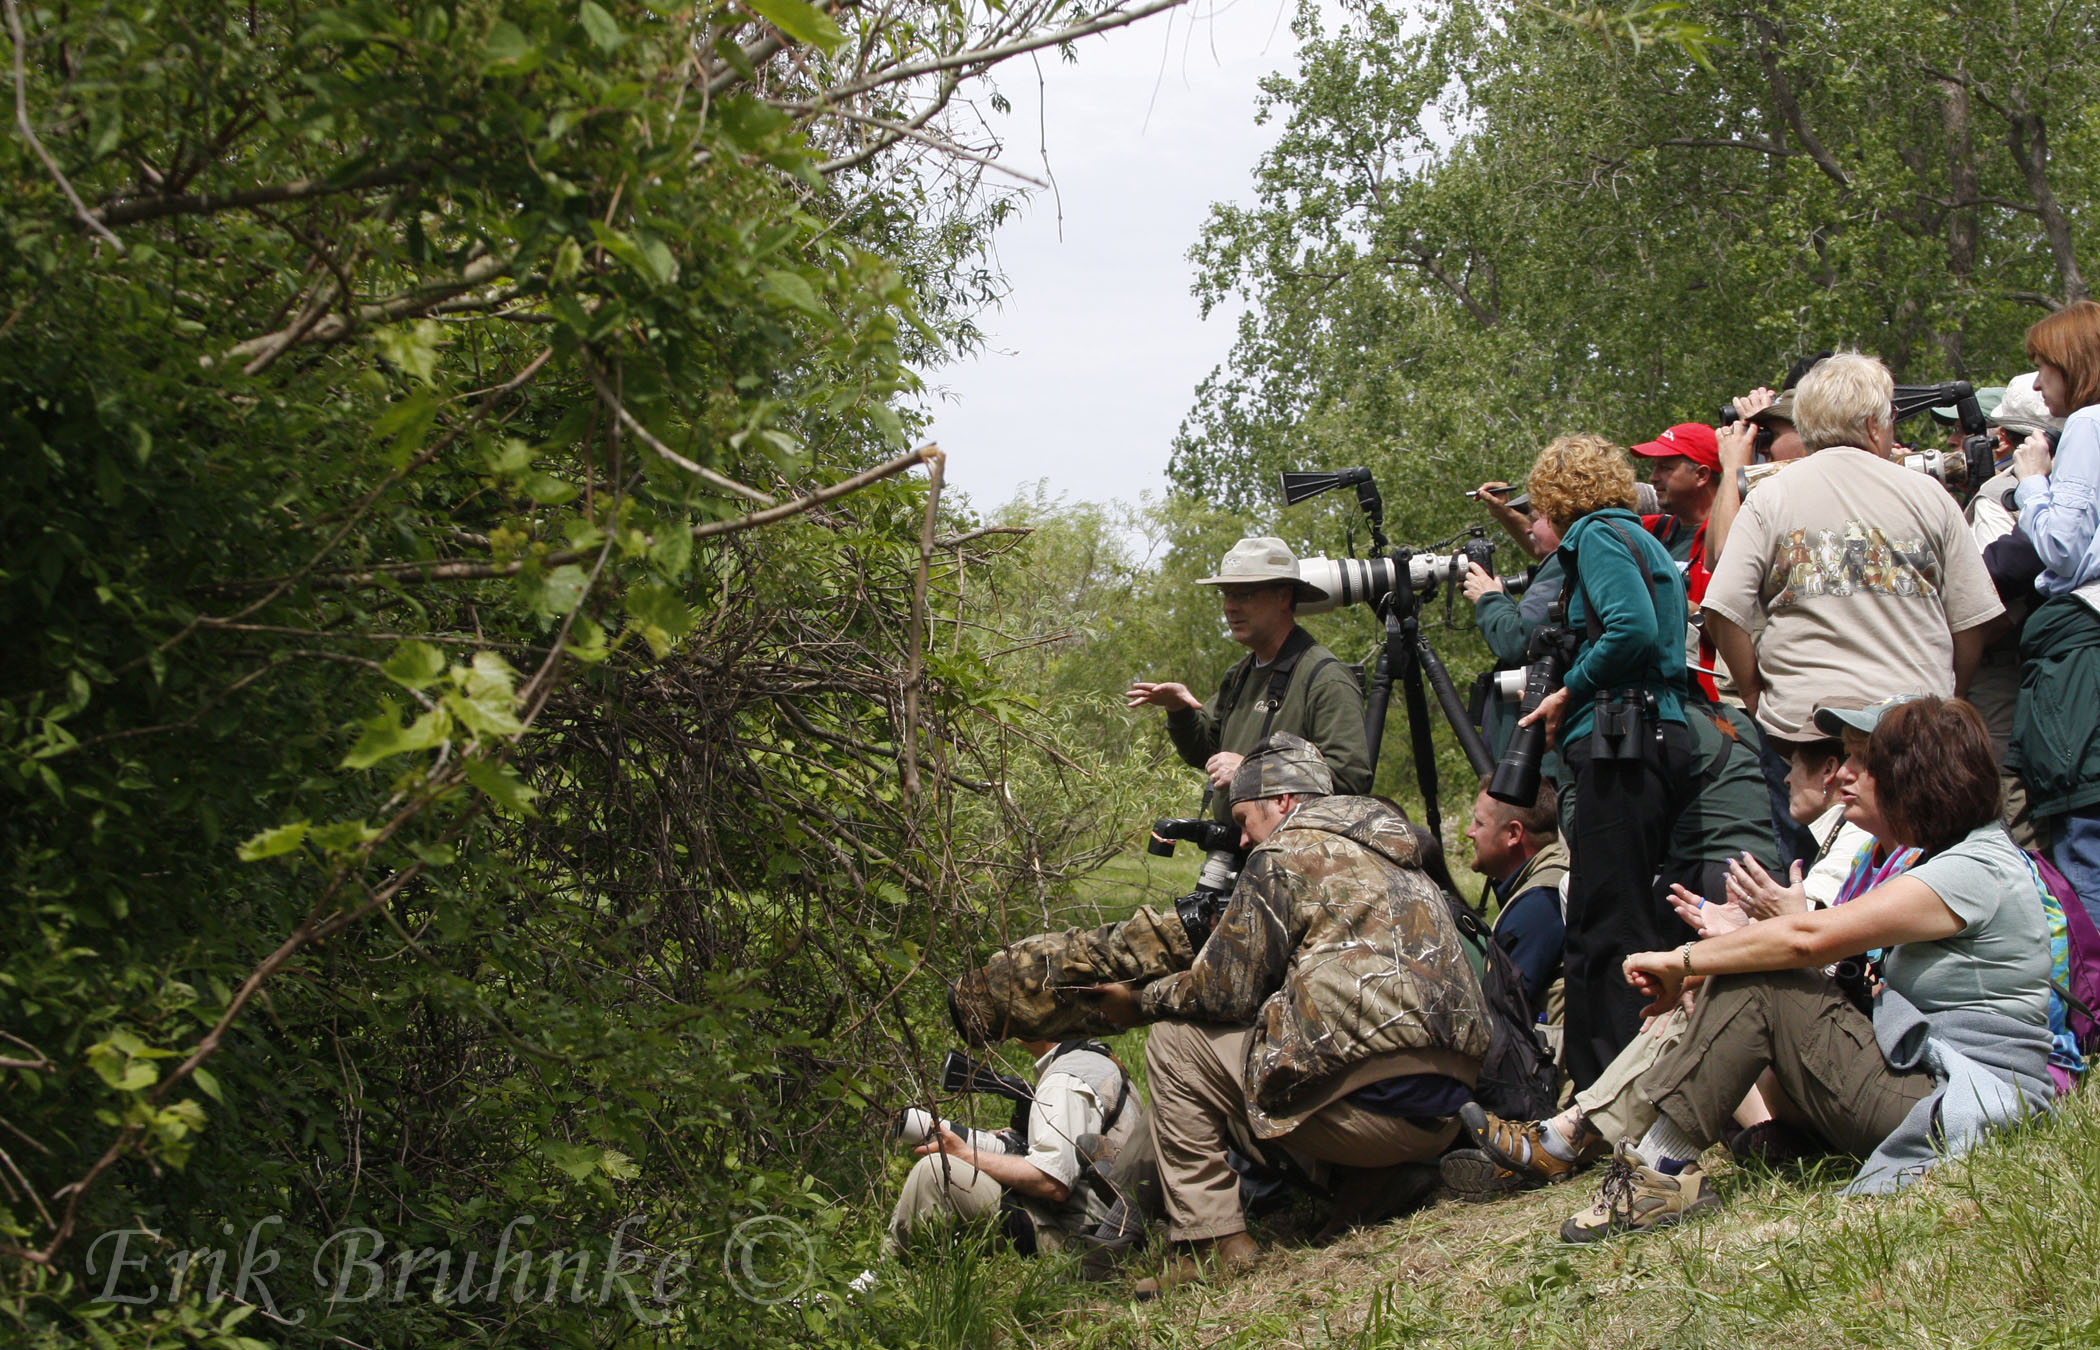 Photographers, waiting patiently for the Kirtlands Warbler